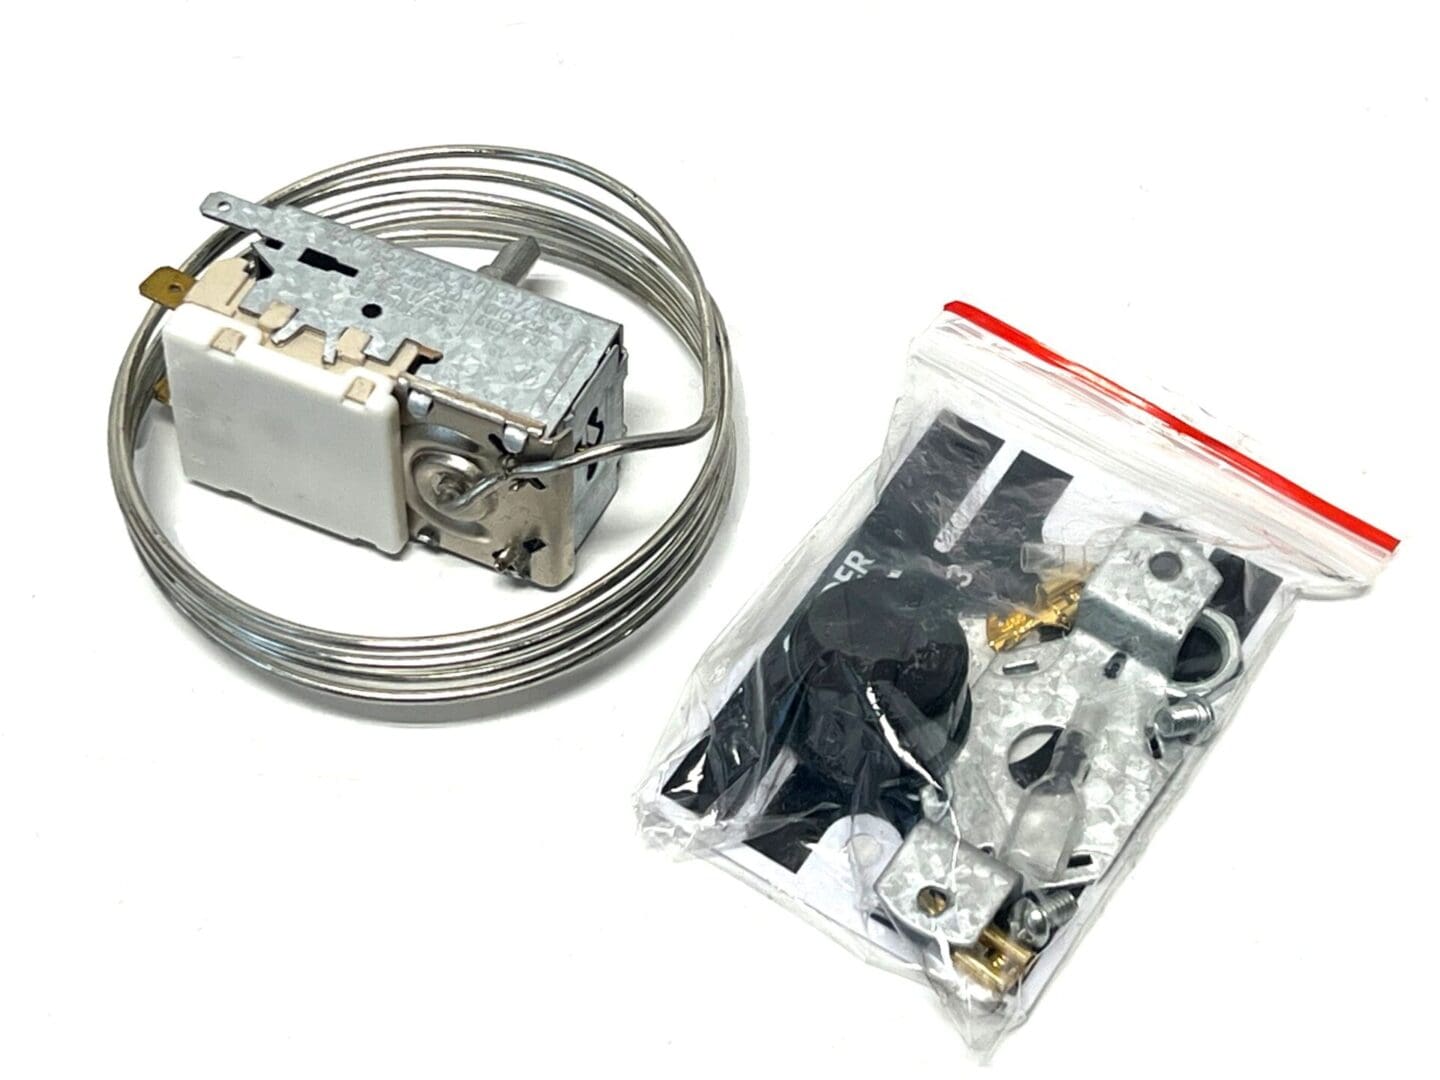 A thermostat and some wires in a package.